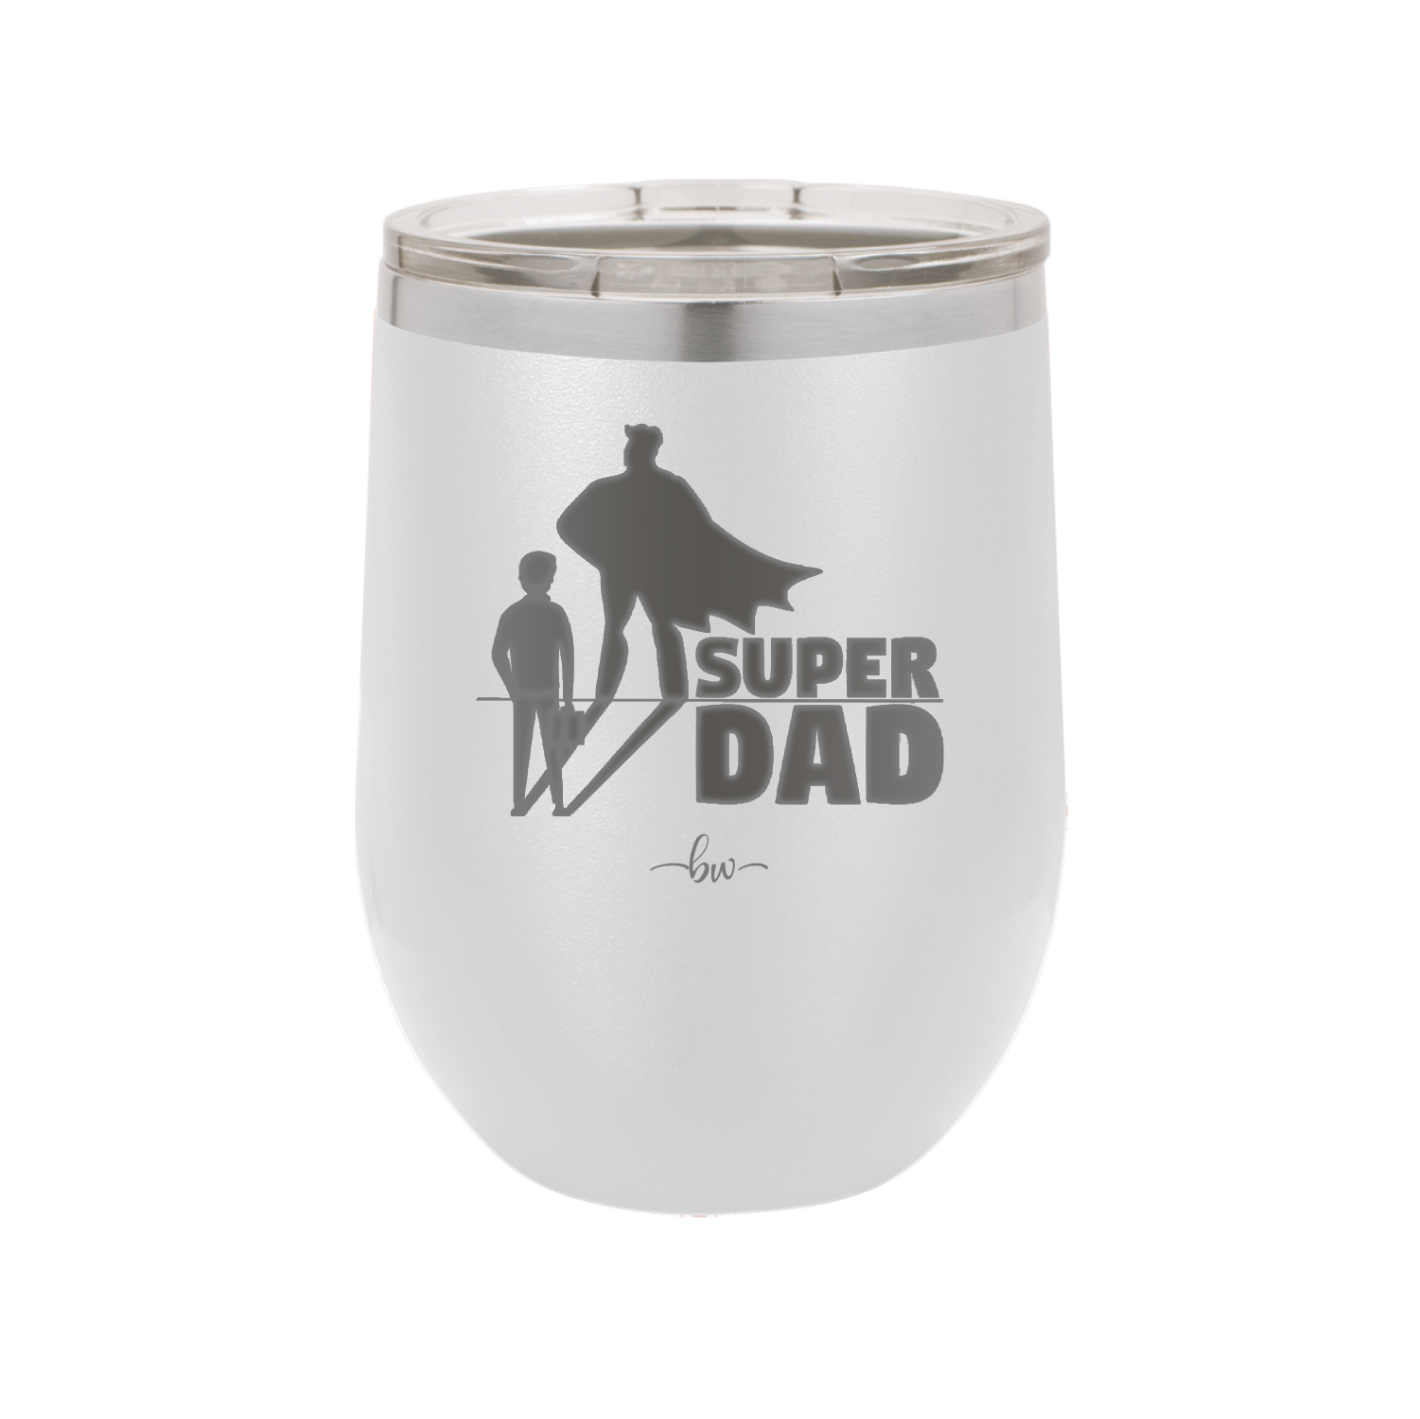 Super Dad with Cape Silhouette - Laser Engraved Stainless Steel Drinkware - 2046 -